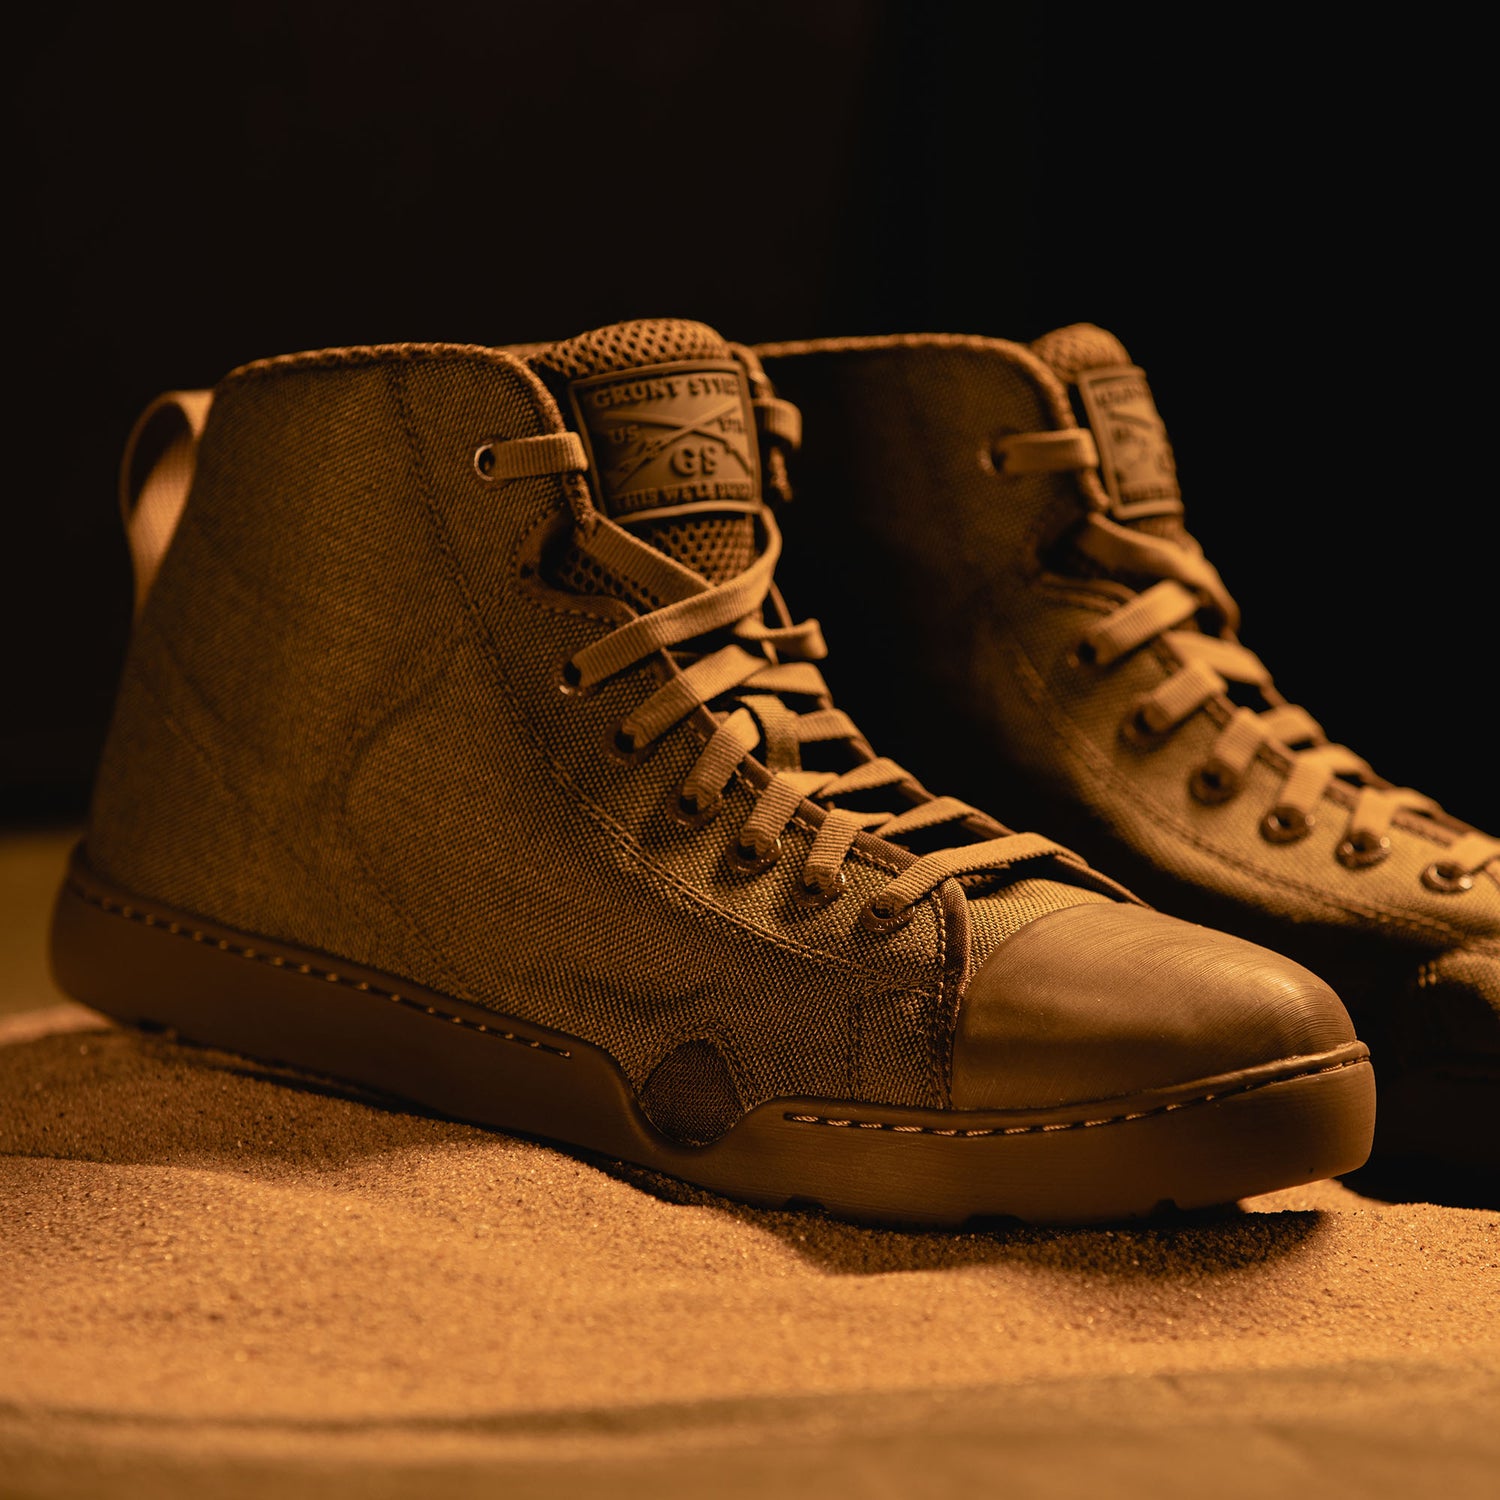 Grunt Style Limited Edition Lace Up Boot | Grunt Style 